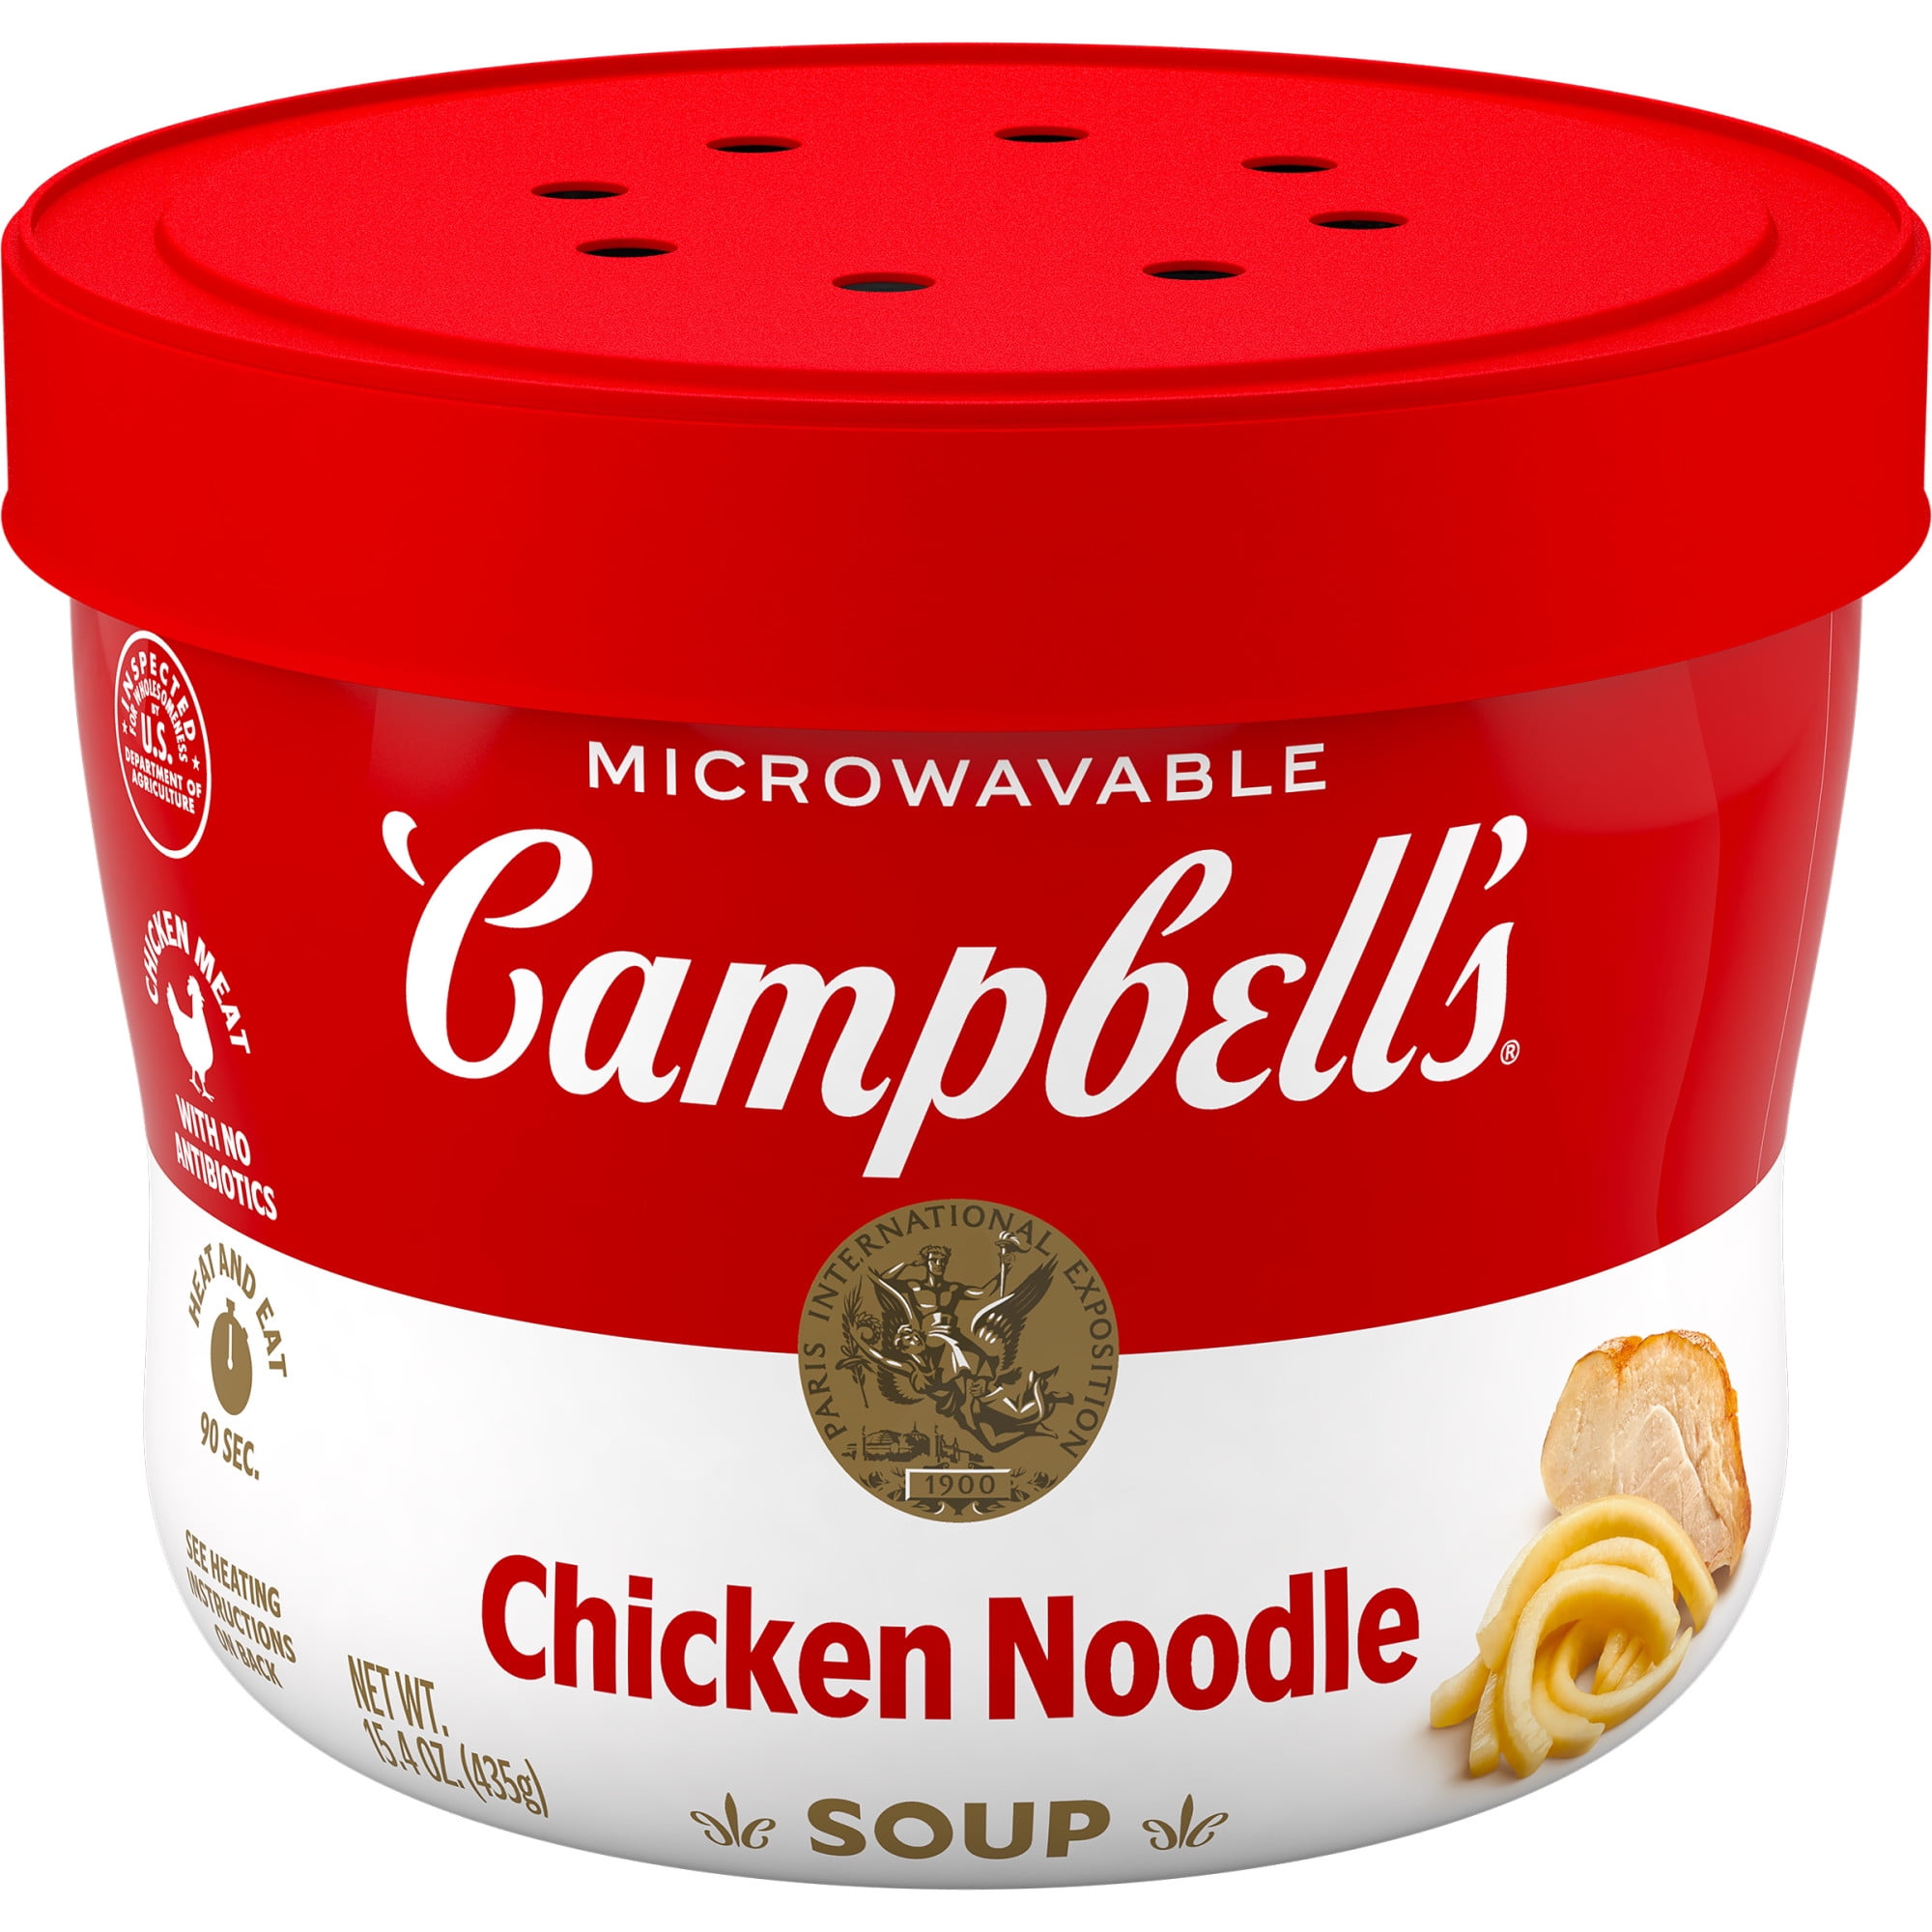 Campbell's Chicken Noodle Soup, 15.4 Oz Microwavable Bowl